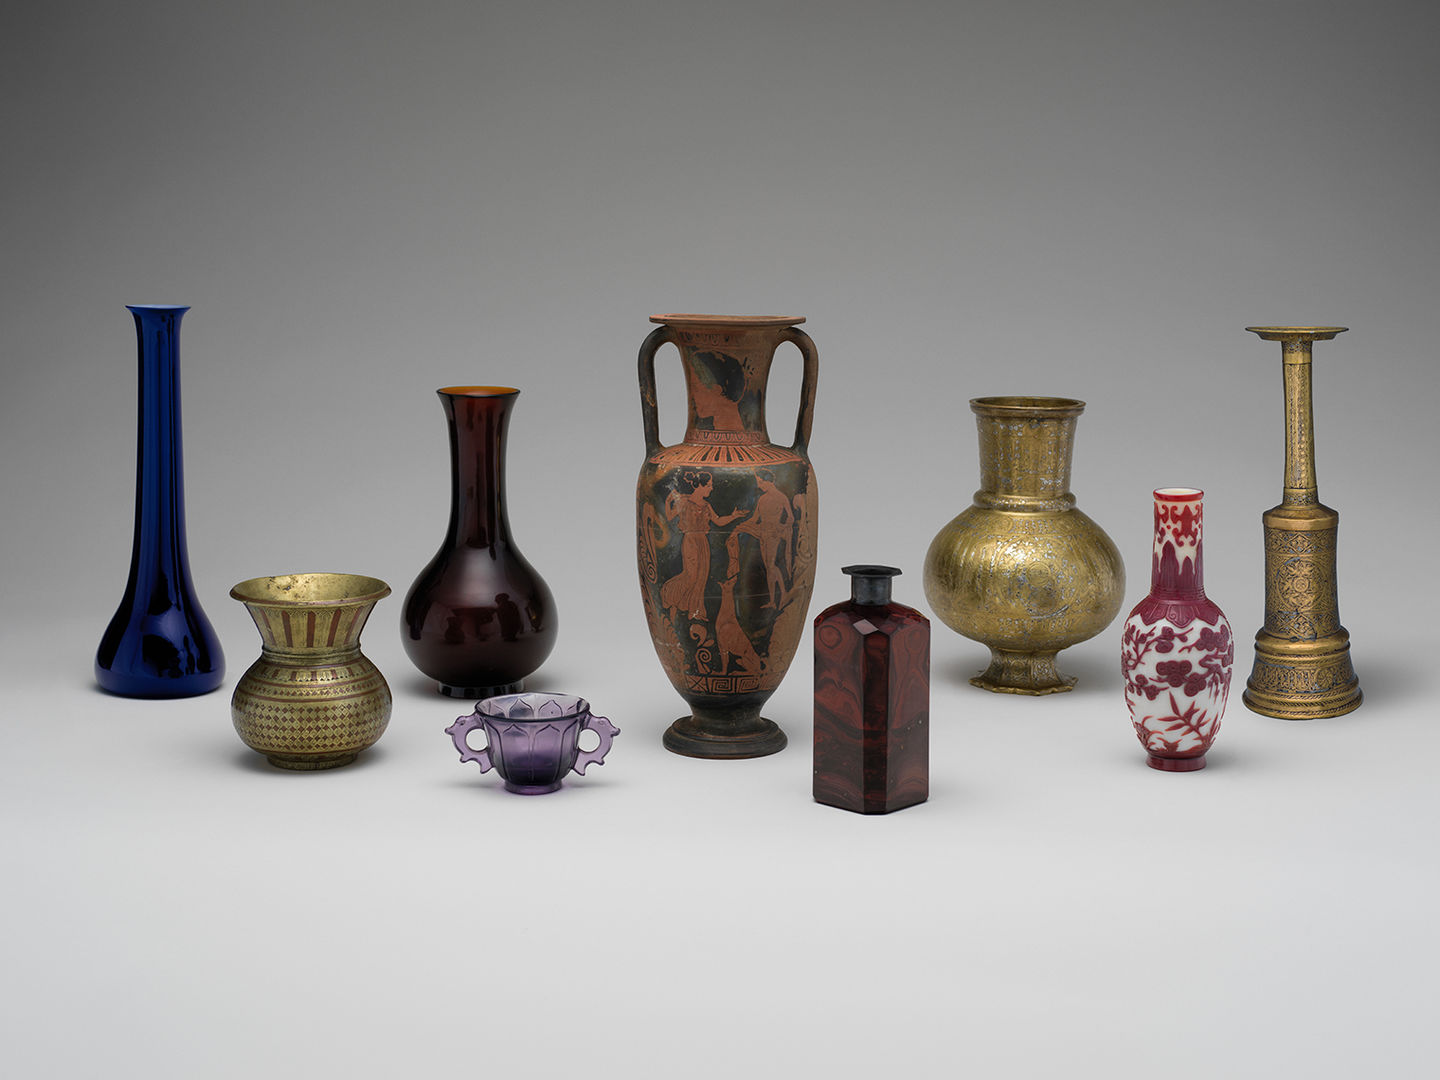 Photograph of nine objects in the Collecting Inspiration exhibition. All objects are vases or cups of various sizes, shapes, and colors.